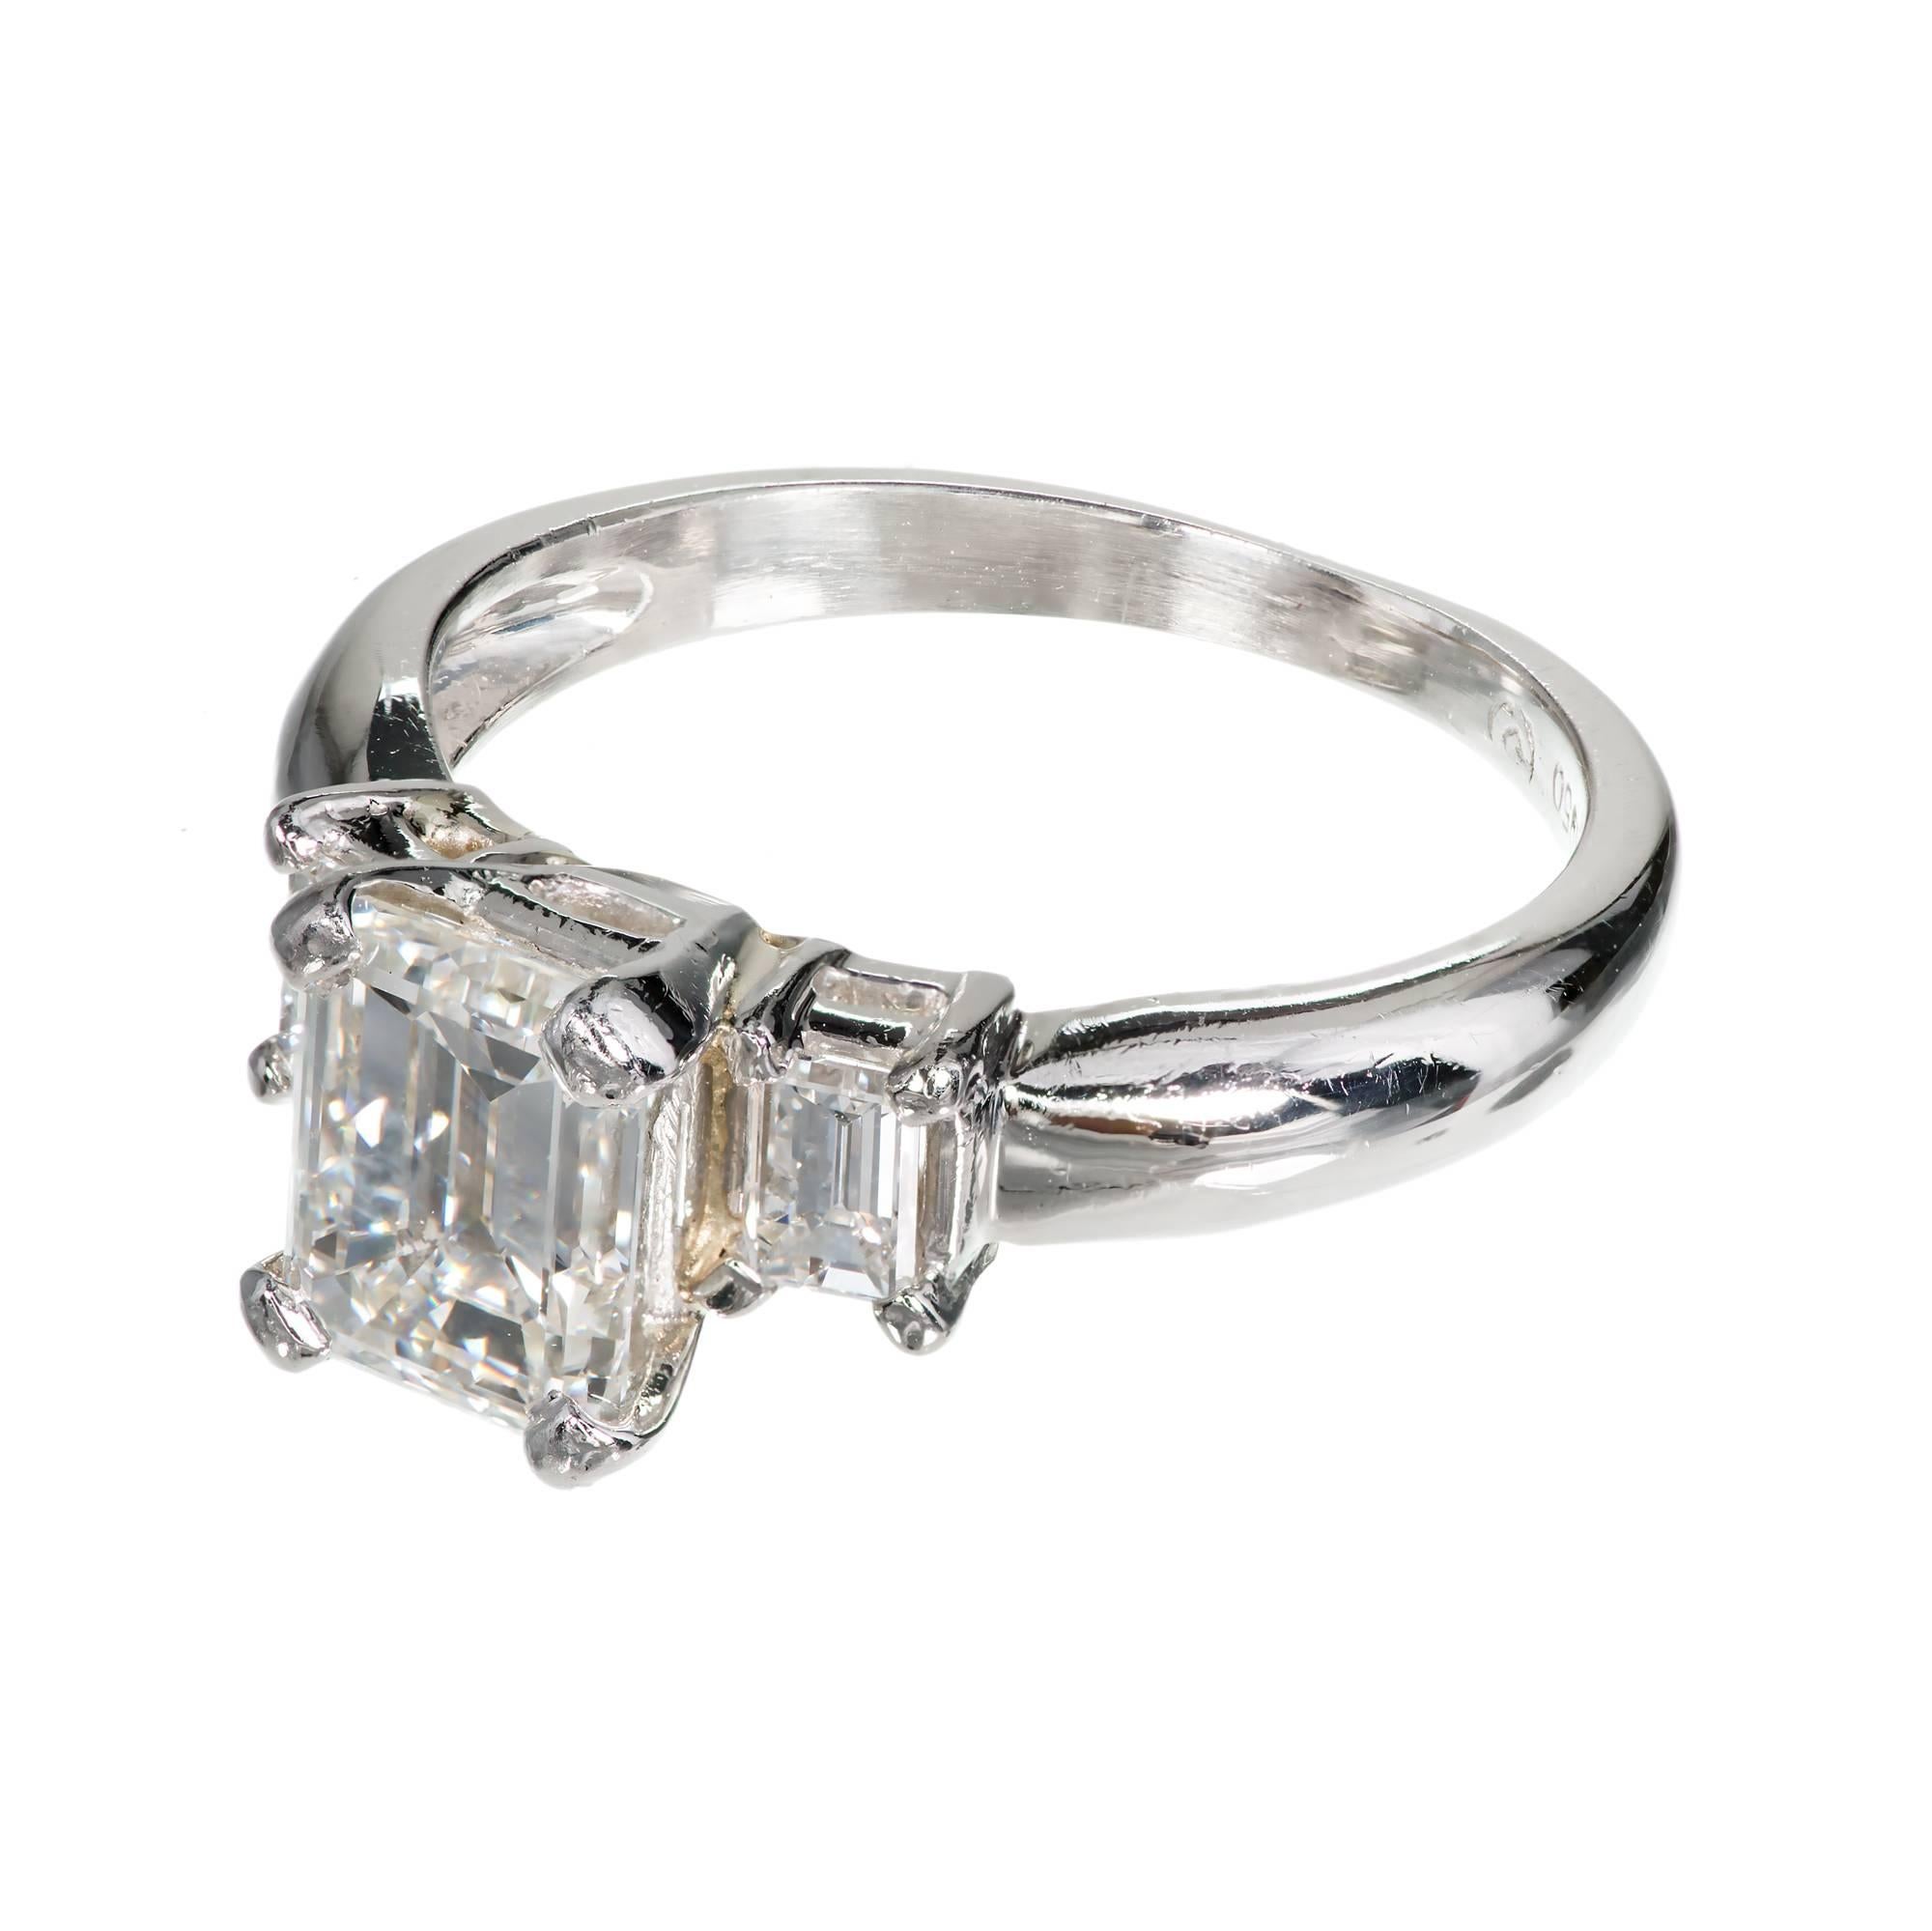 Three Stone Emerald Cut Diamond Platinum Engagement Ring. Emerald cut center with brilliance and step cut pattern flanked by similar side diamonds in excellent proportion. 

1 Emerald cut diamond, approx. total weight 1.51cts, G, VS2, Depth: 67.8%